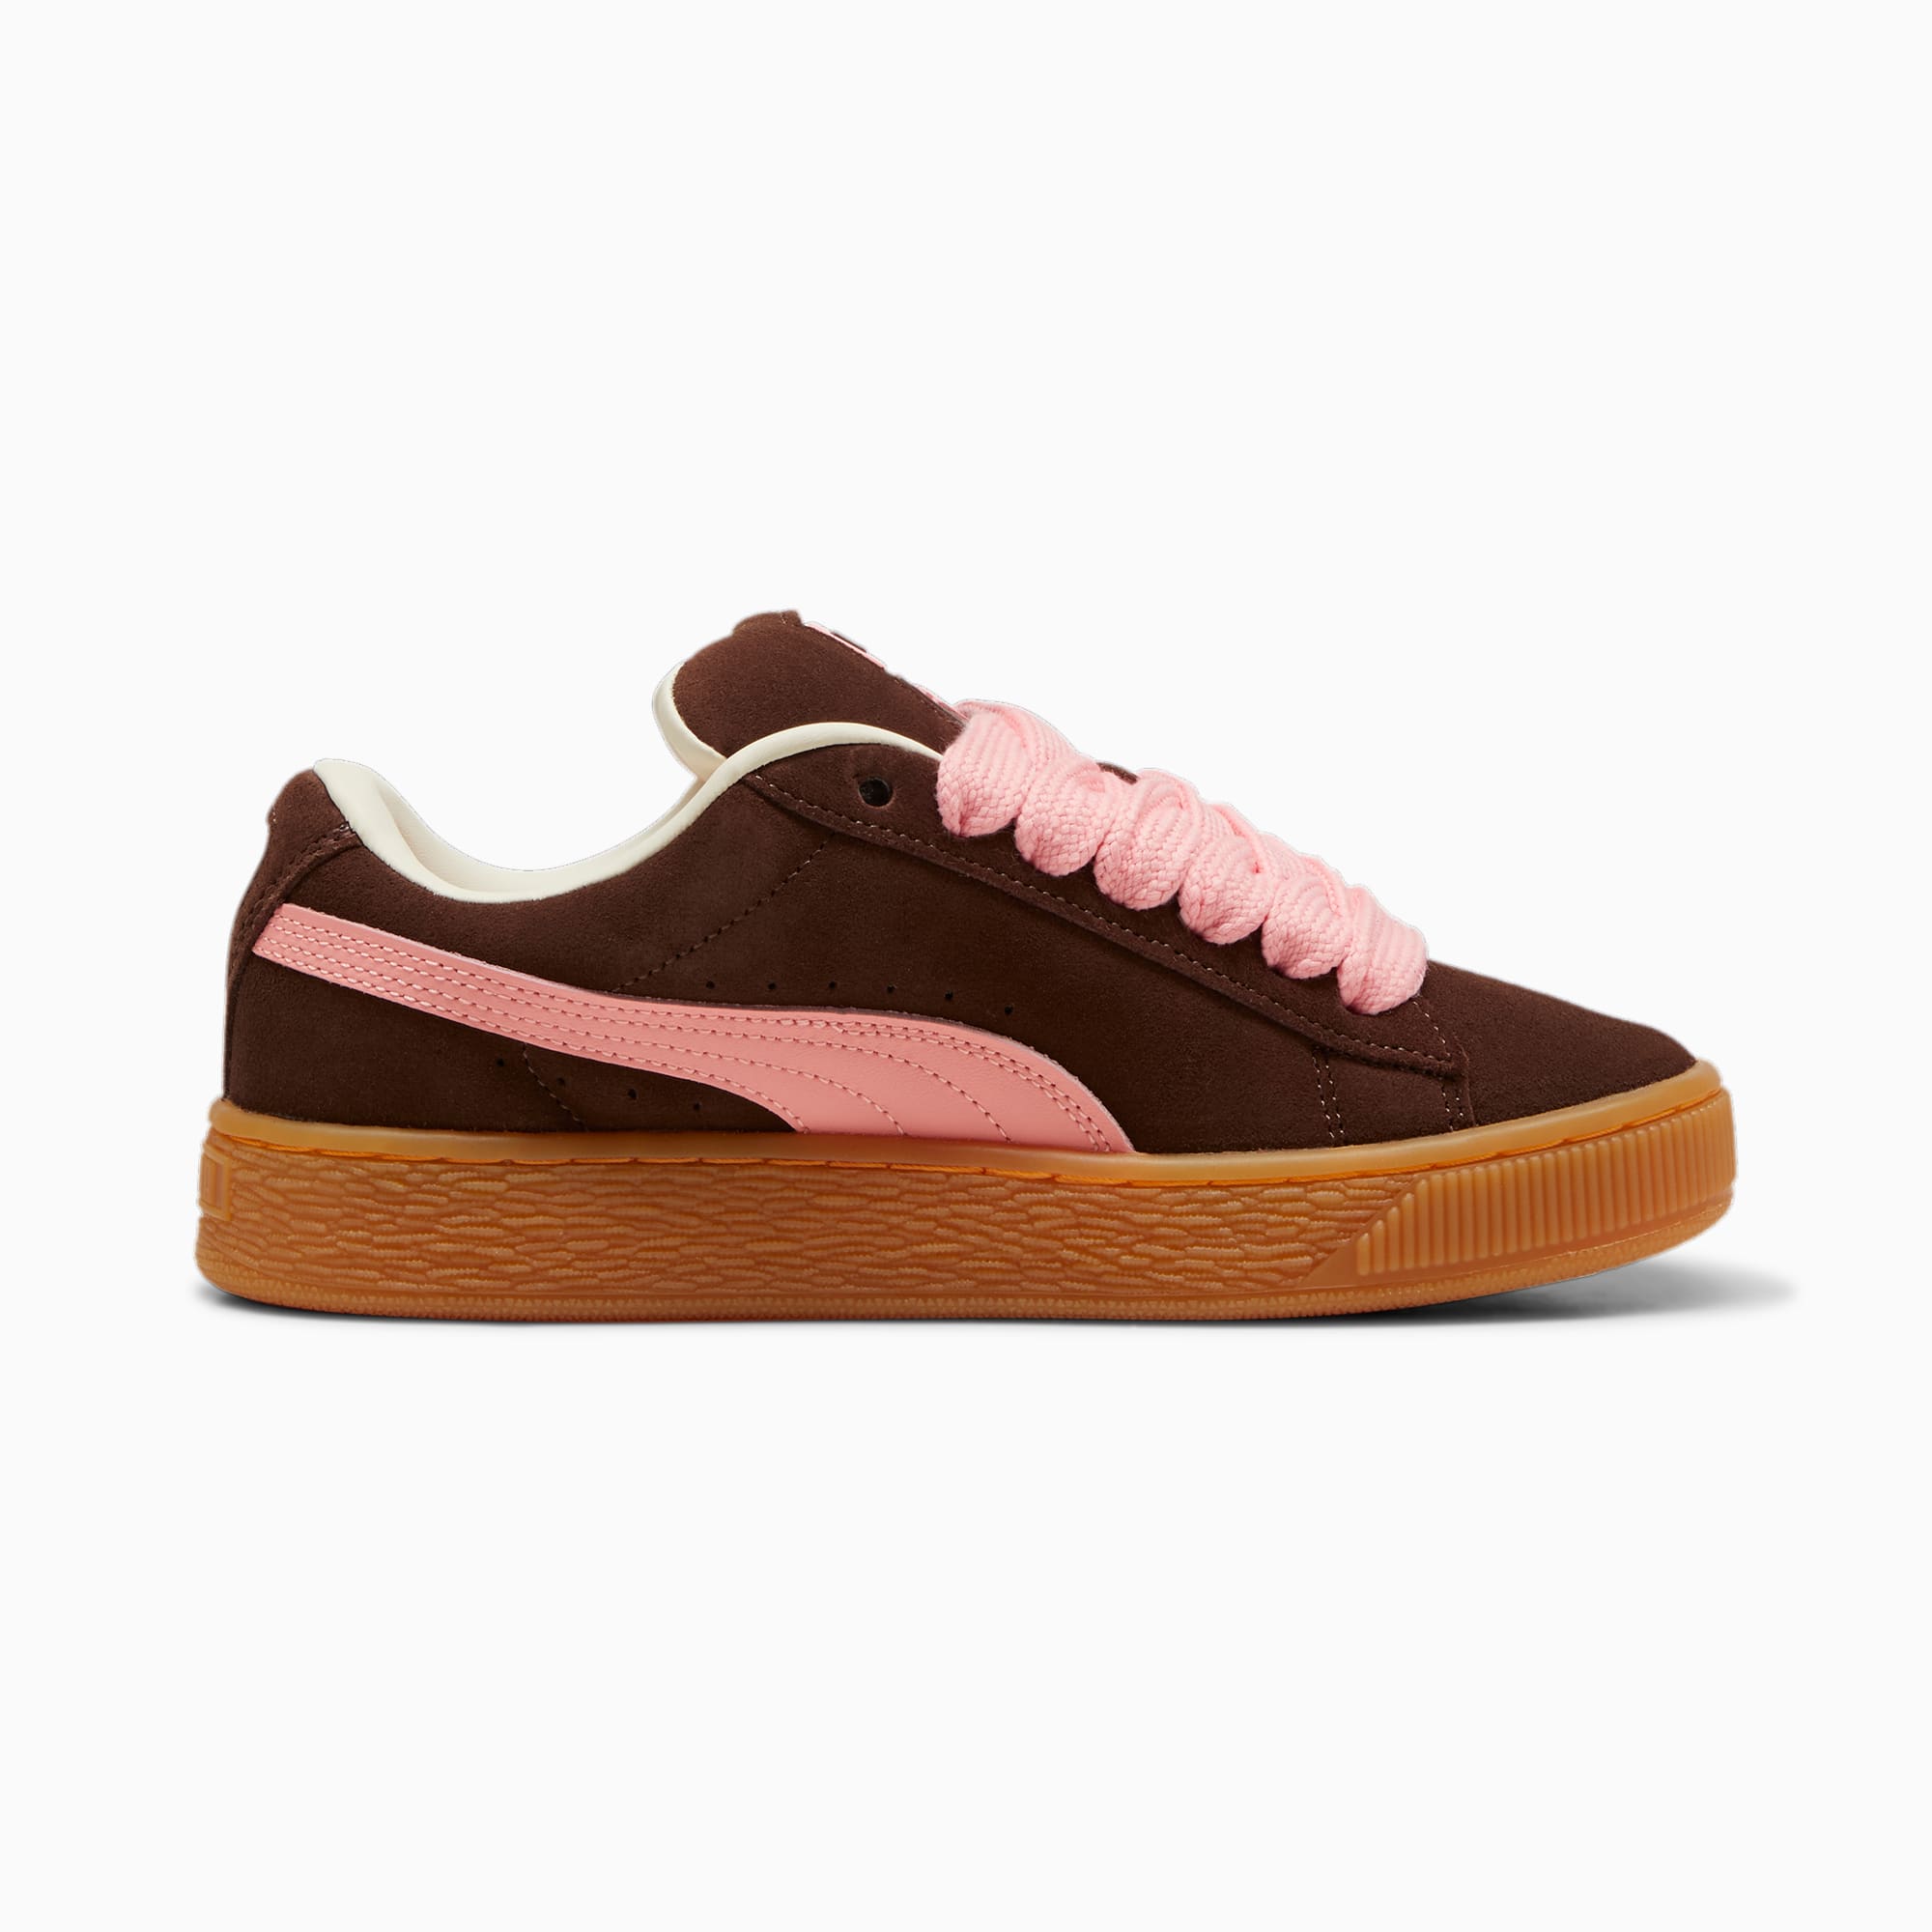 PUMA Suede Xl Sneakers Women, Chestnut Brown/Peach Smoothie/Frosted Ivory, Size 35,5, Shoes